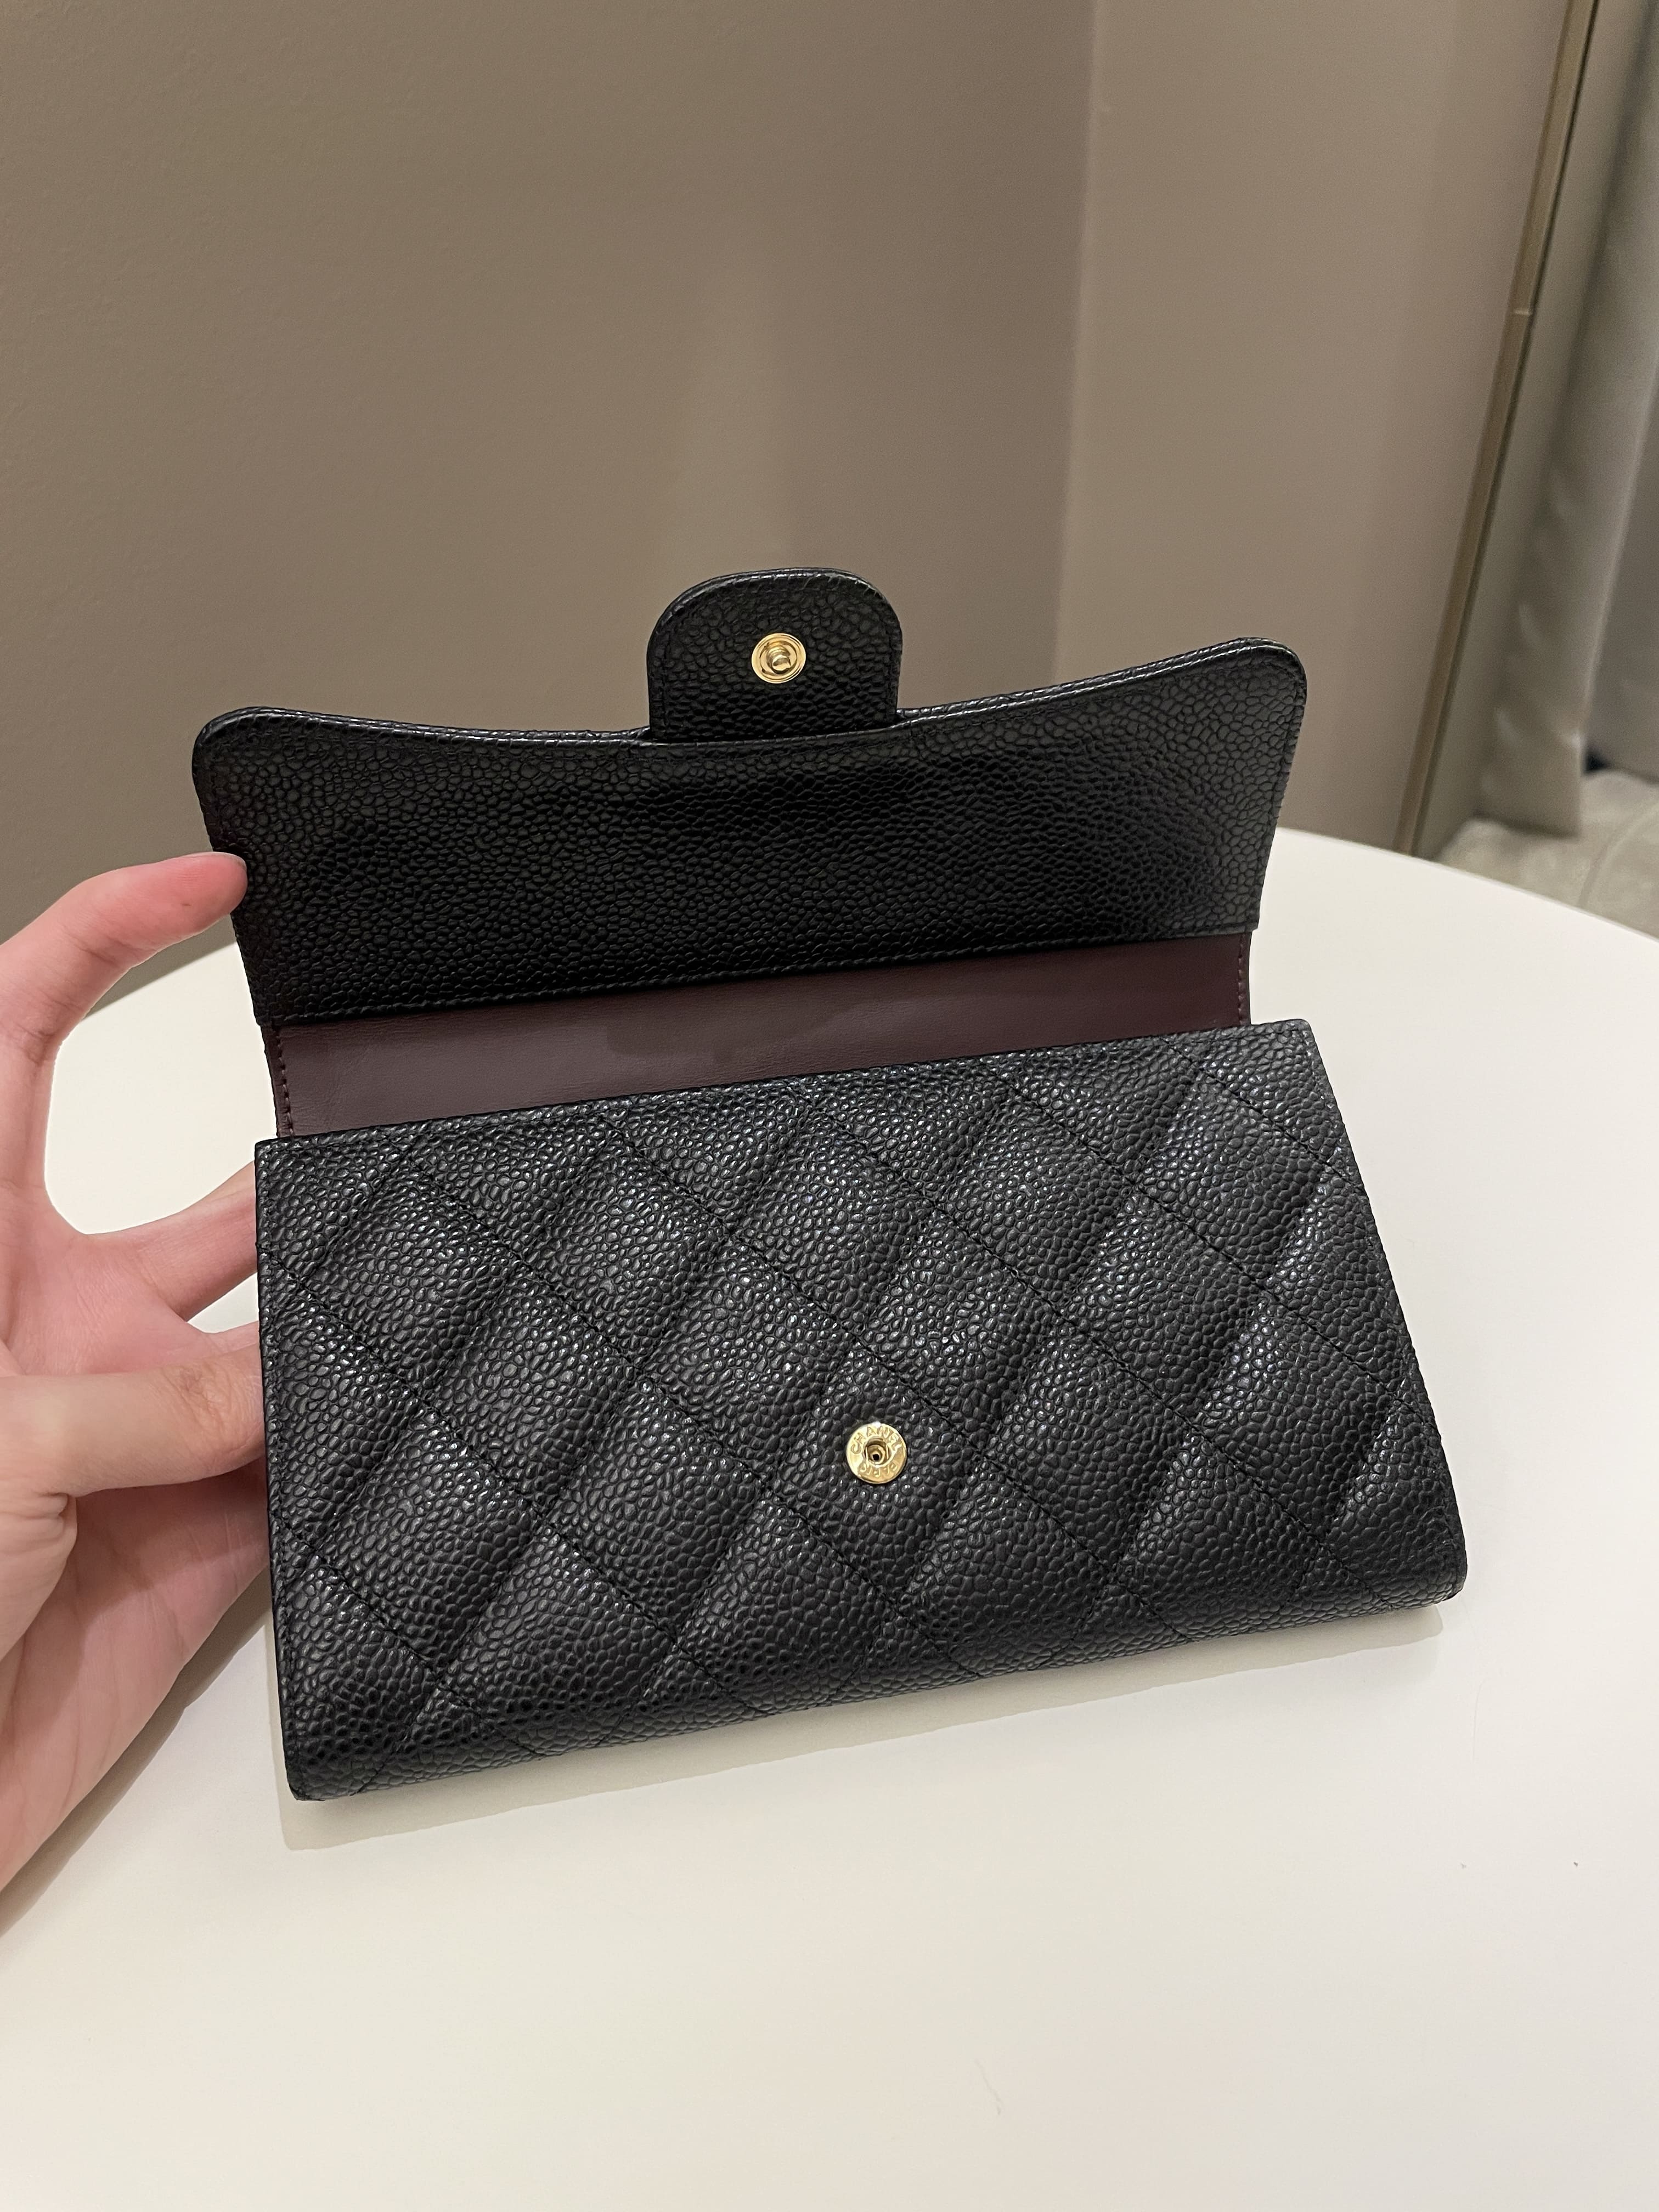 CHANEL Caviar Quilted Long Flap Wallet Black 1297992